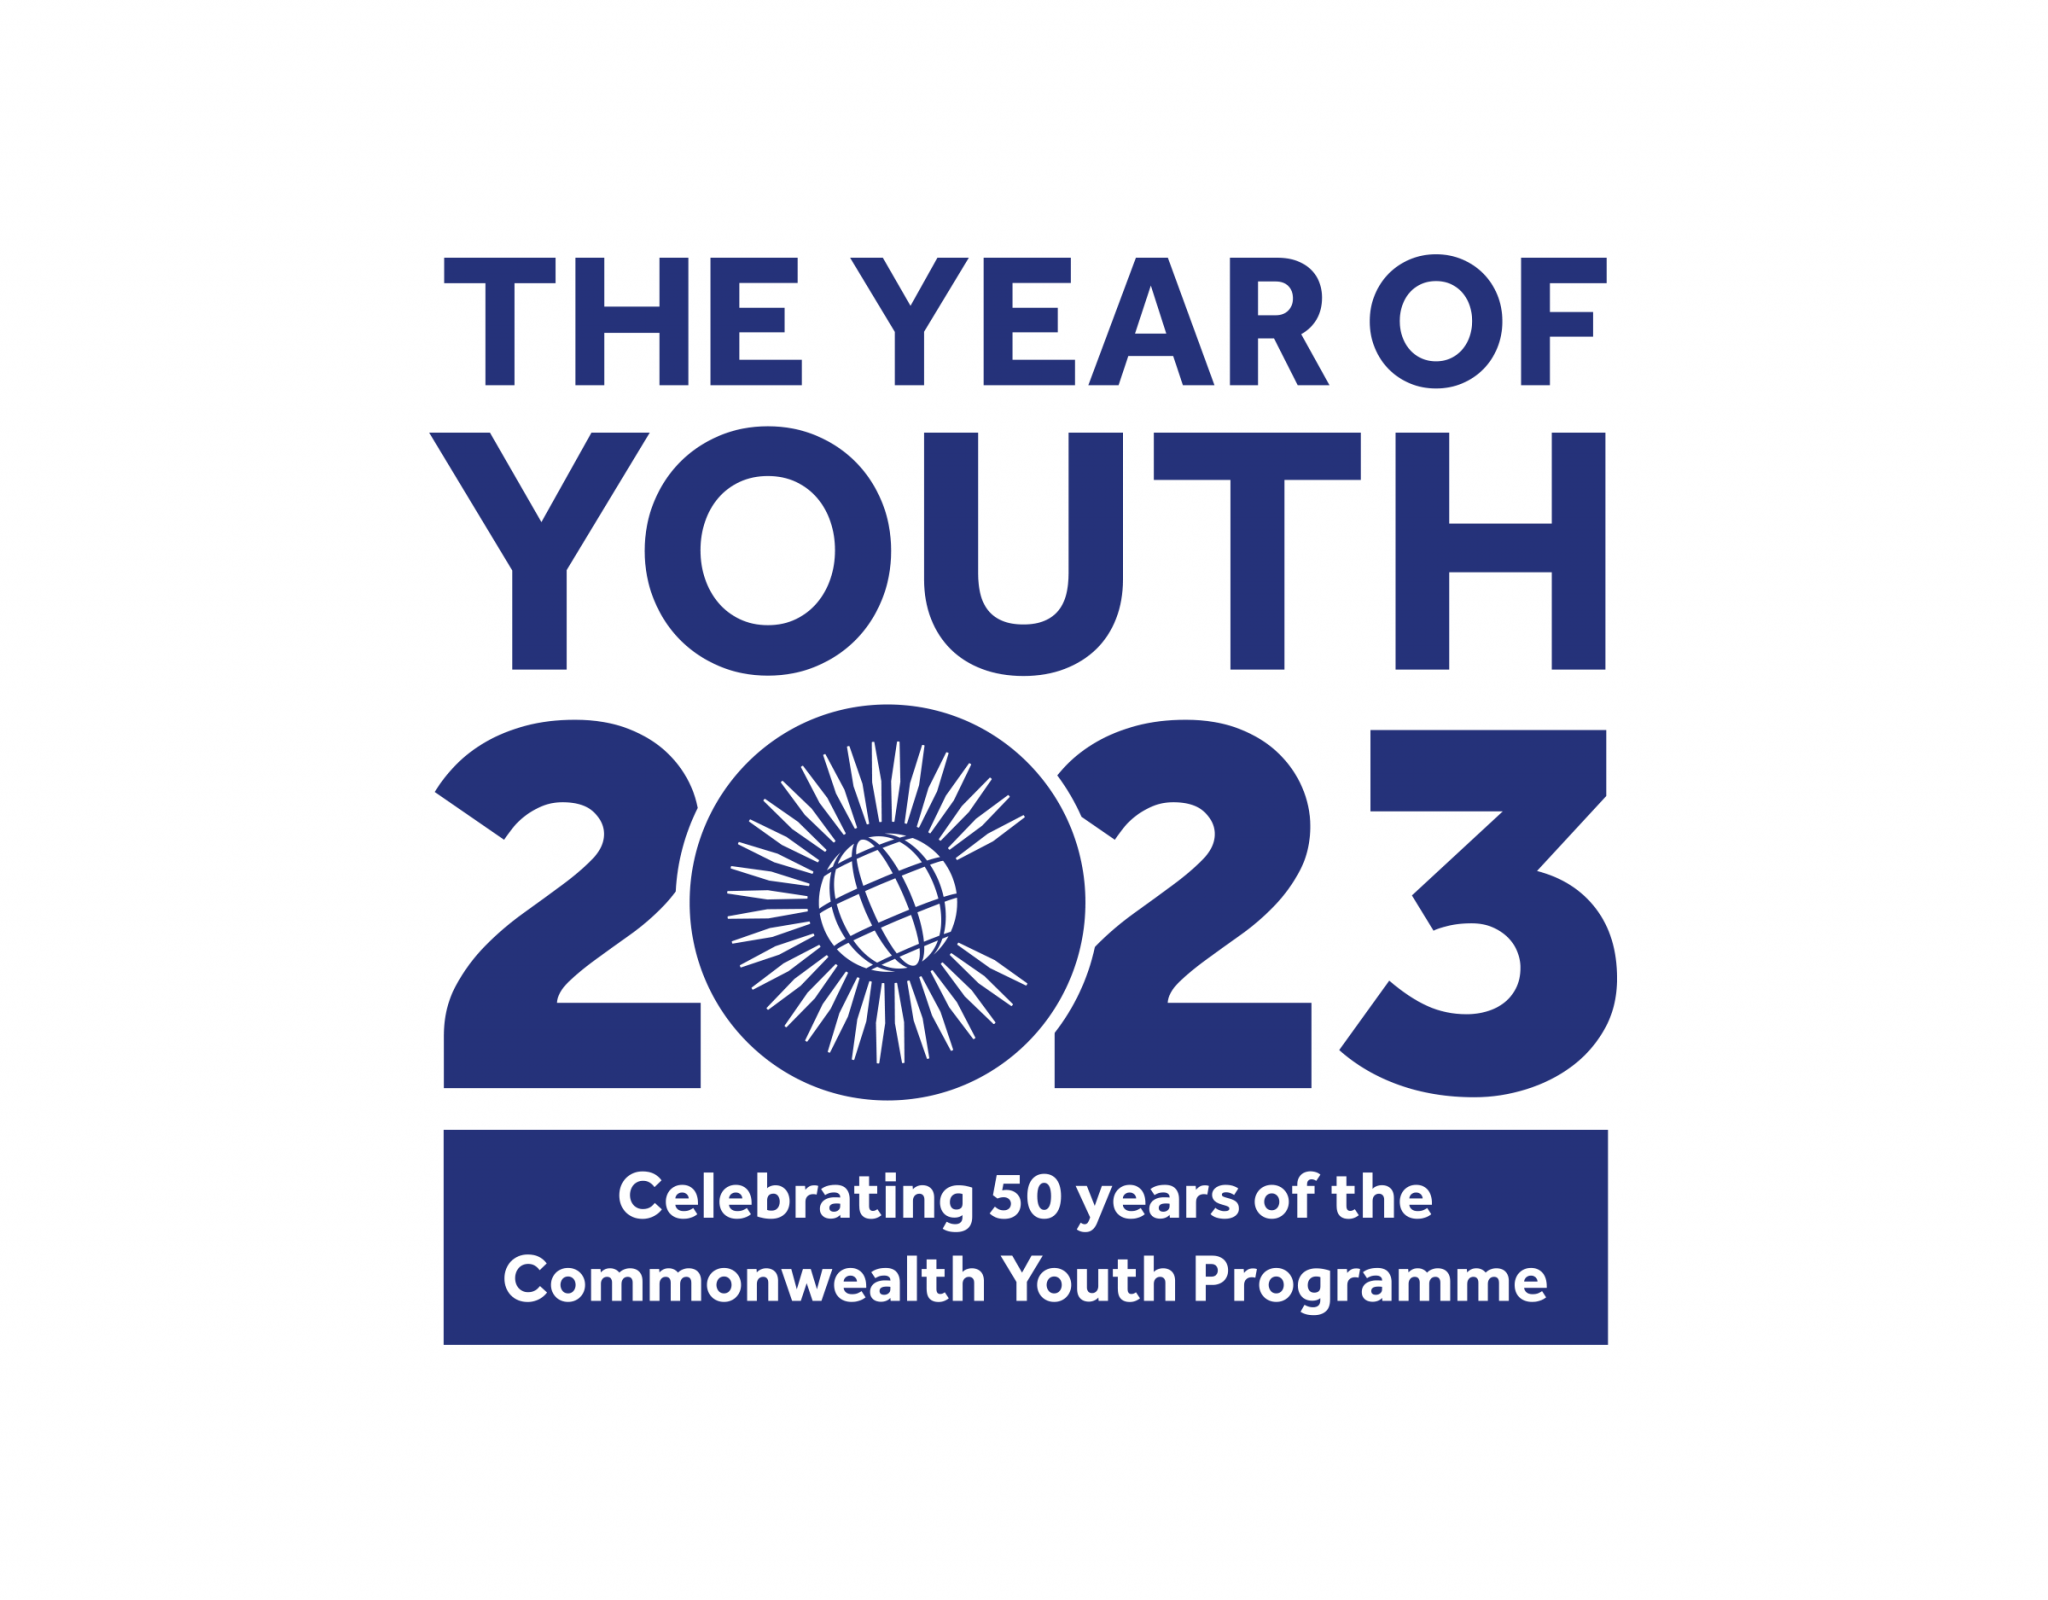 The Commonwealth Secretariat has officially launched the 2023 Year of Youth, which is devoted to the celebration and empowerment of the 1.5 billion under-30s living in the Commonwealth ©CYP